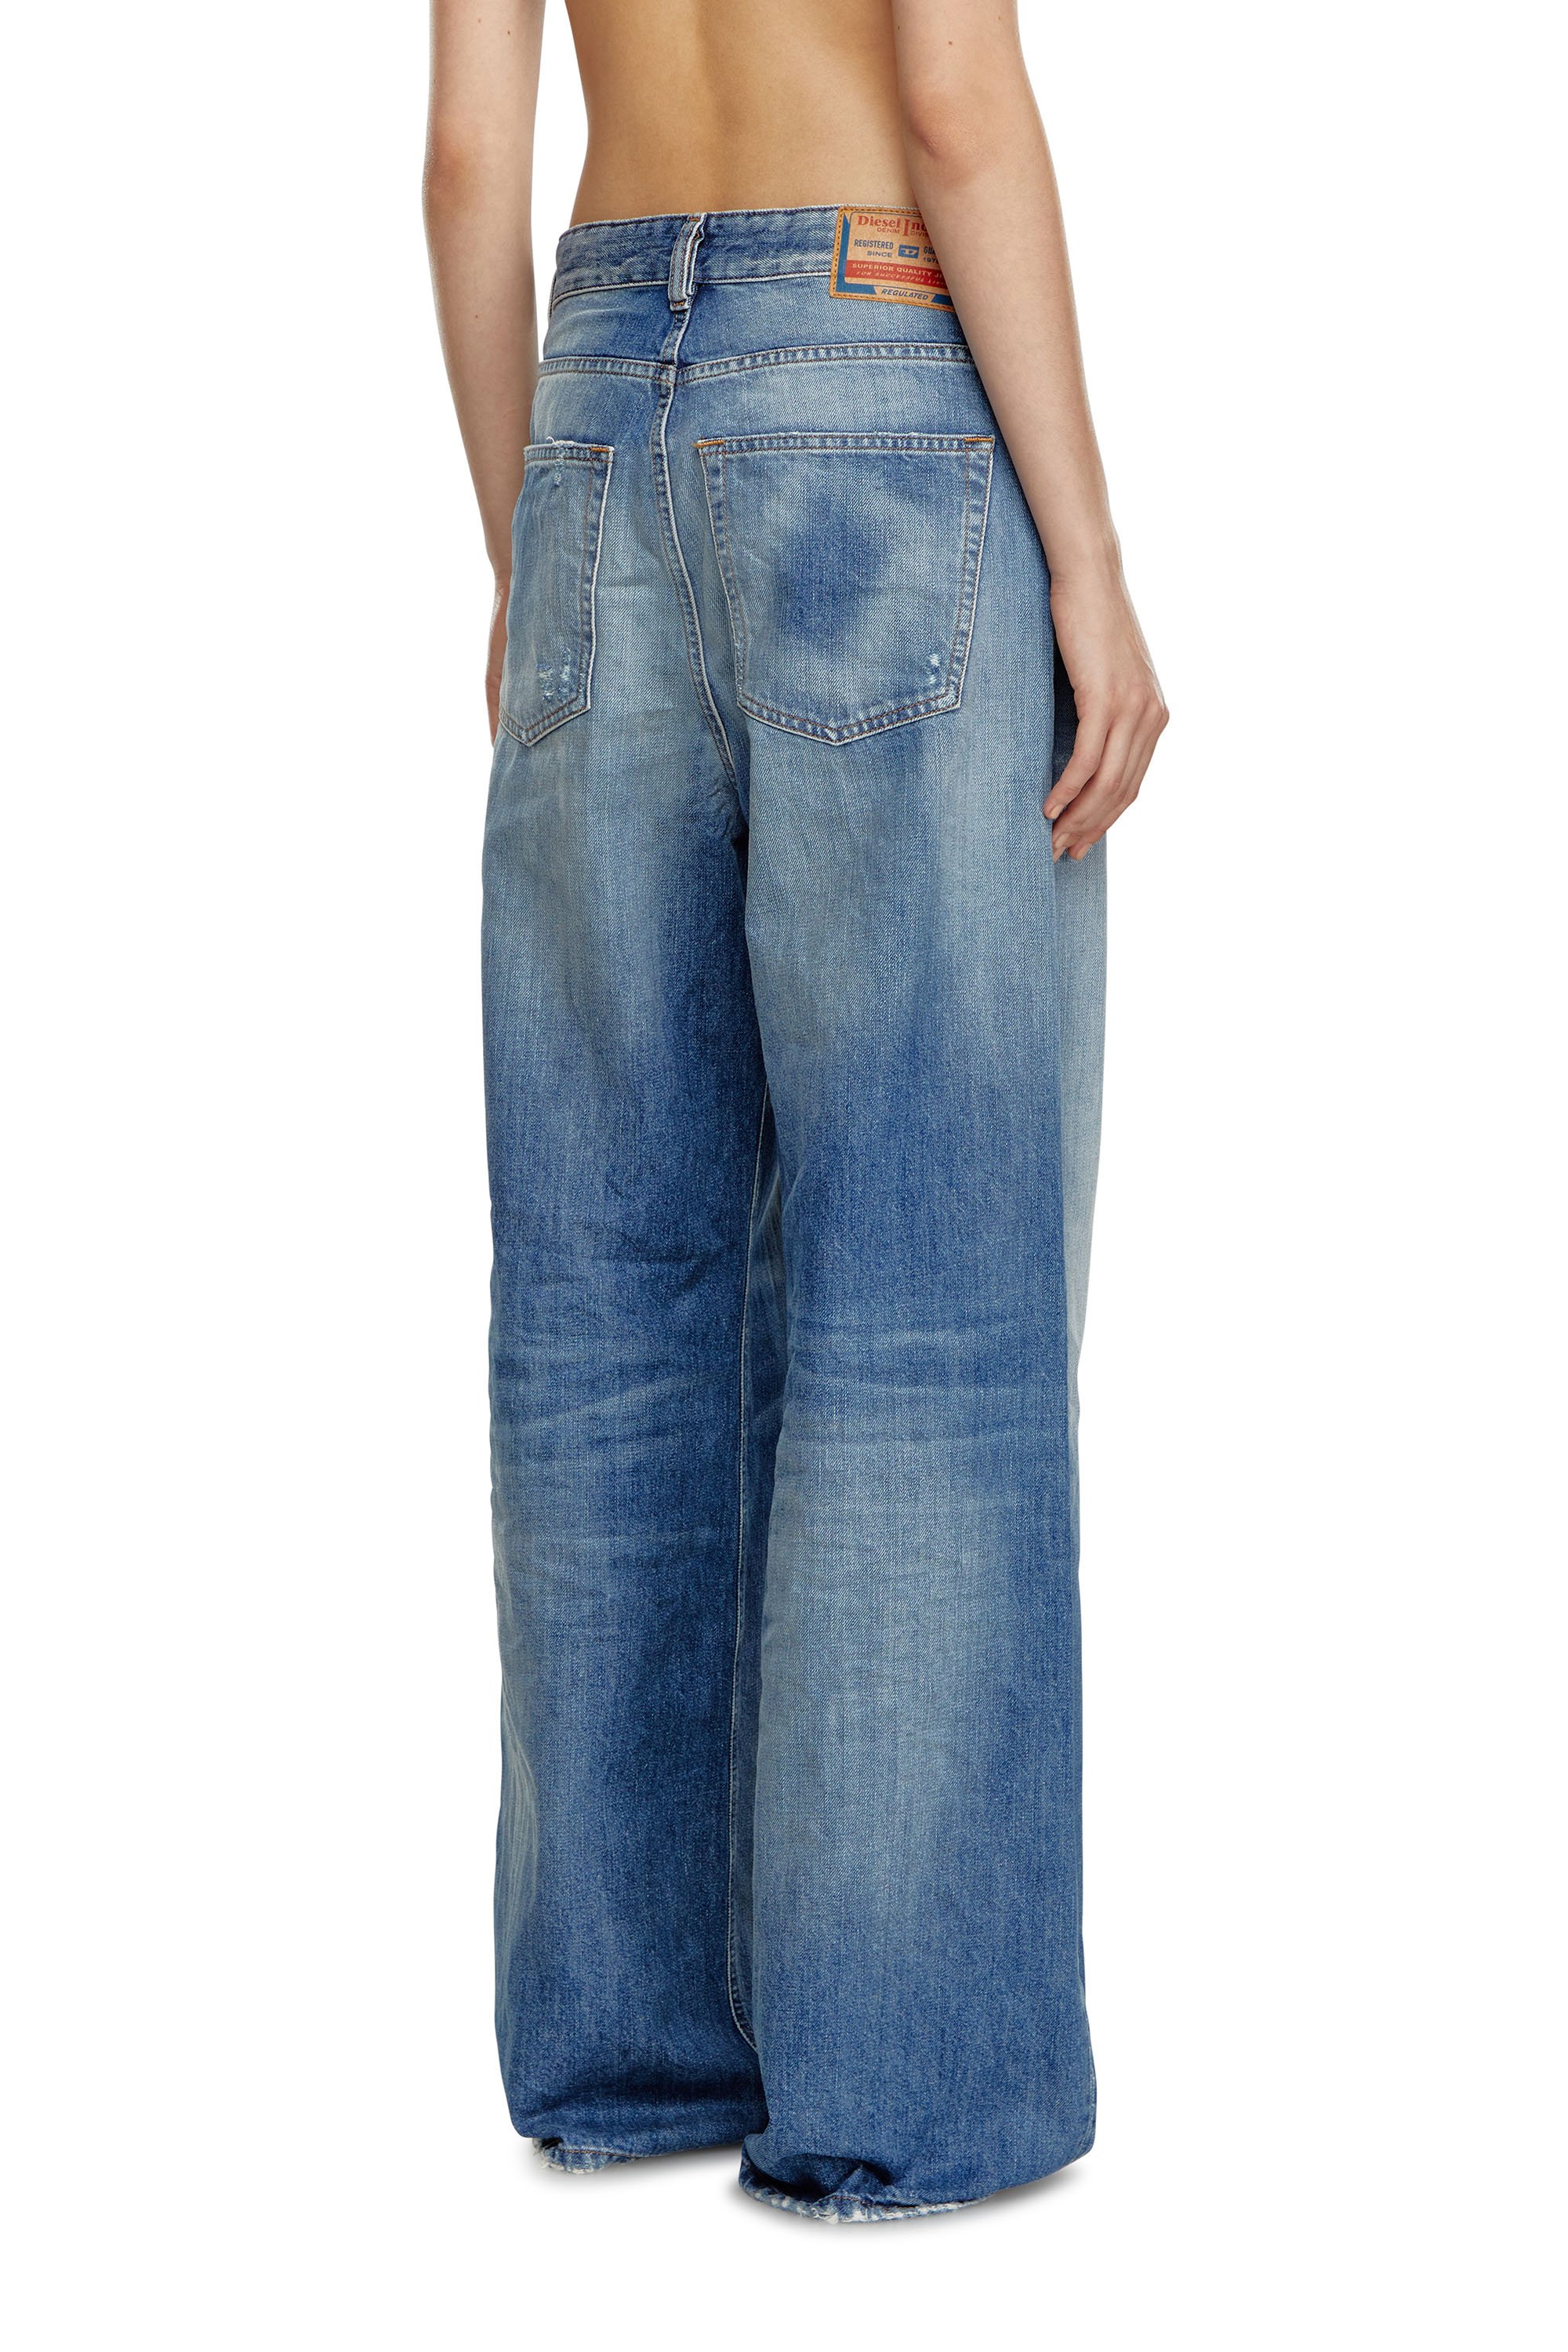 Diesel - Straight Jeans 1996 D-Sire 09J86, Mujer Straight Jeans - 1996 D-Sire in Azul marino - Image 4